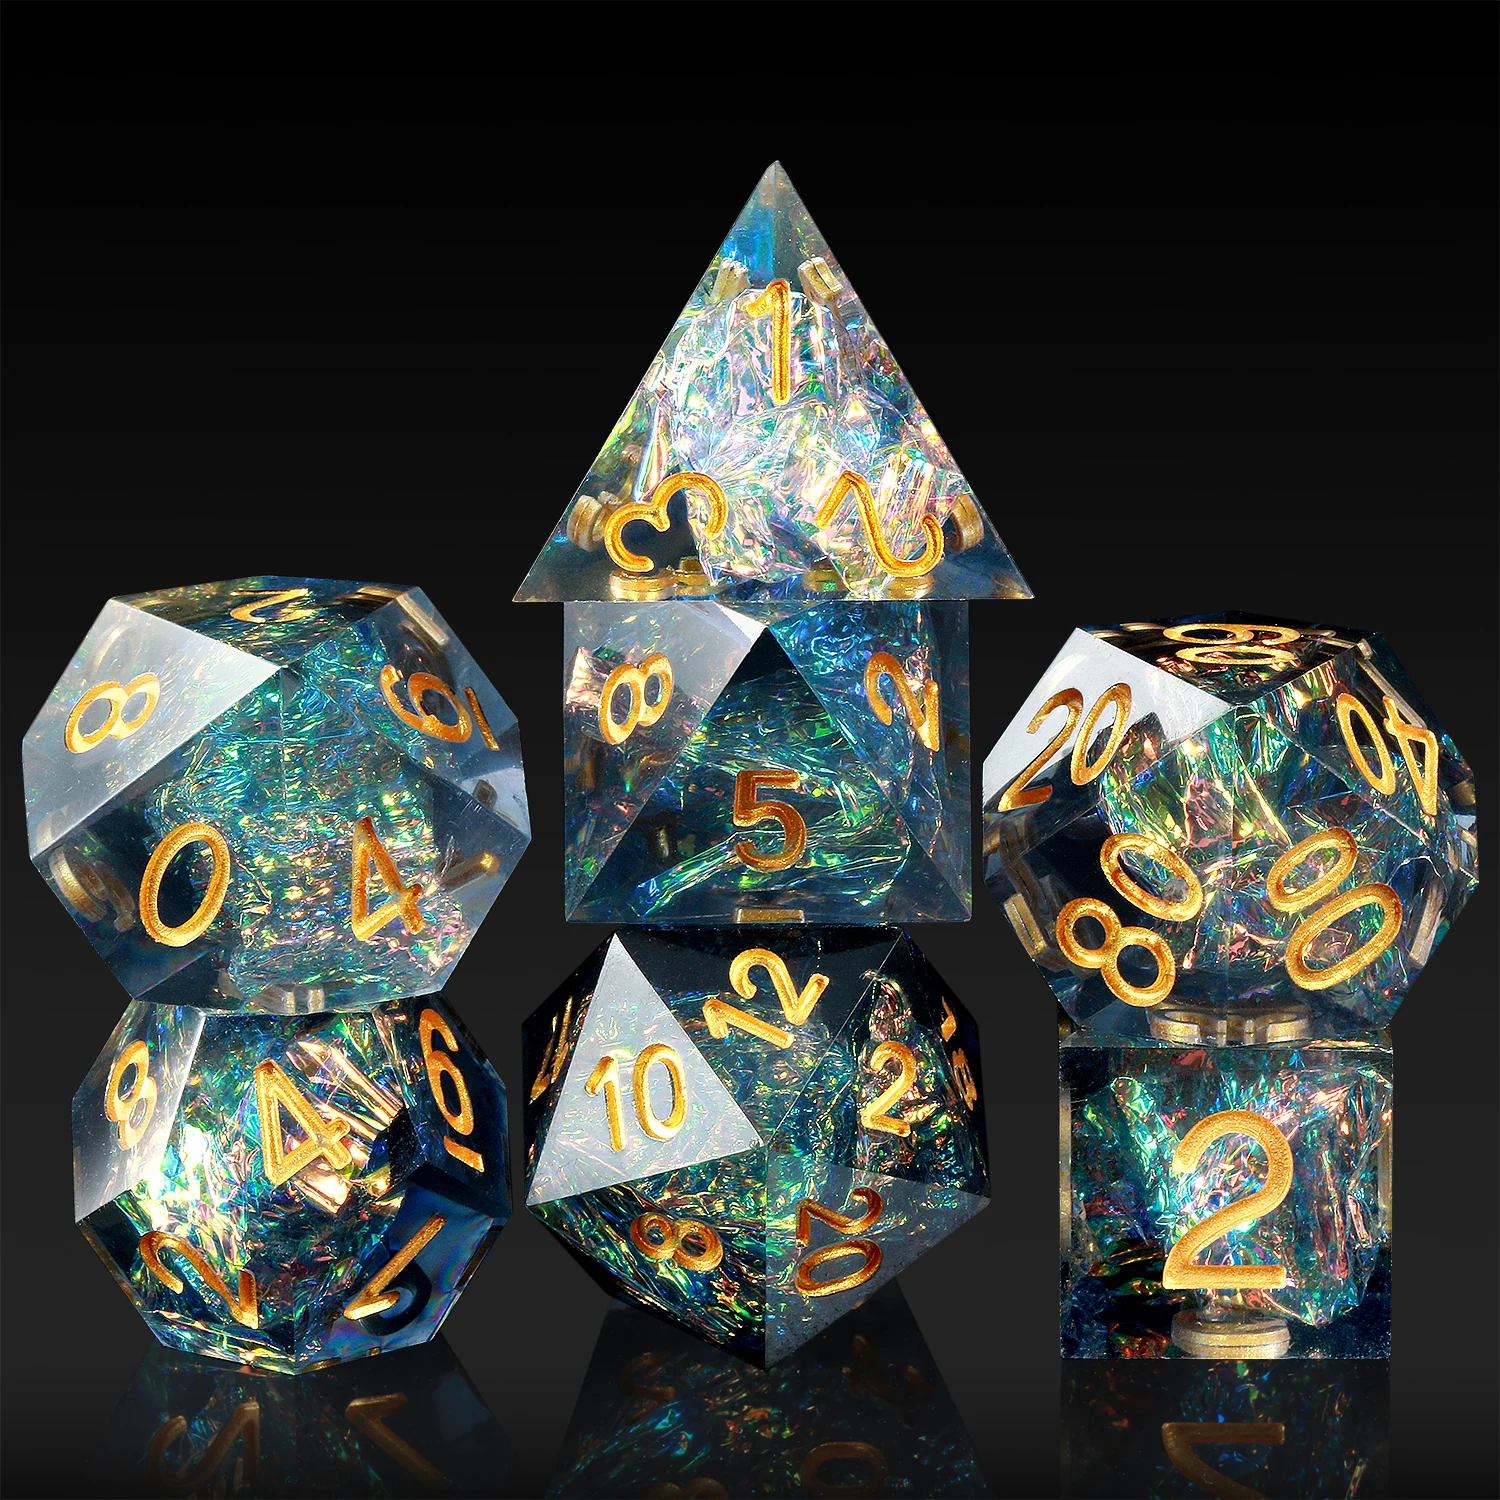 

wholesale sharp dice role-playing game dark cyan clear resin with copper foil custom sharp edge dice set for DND